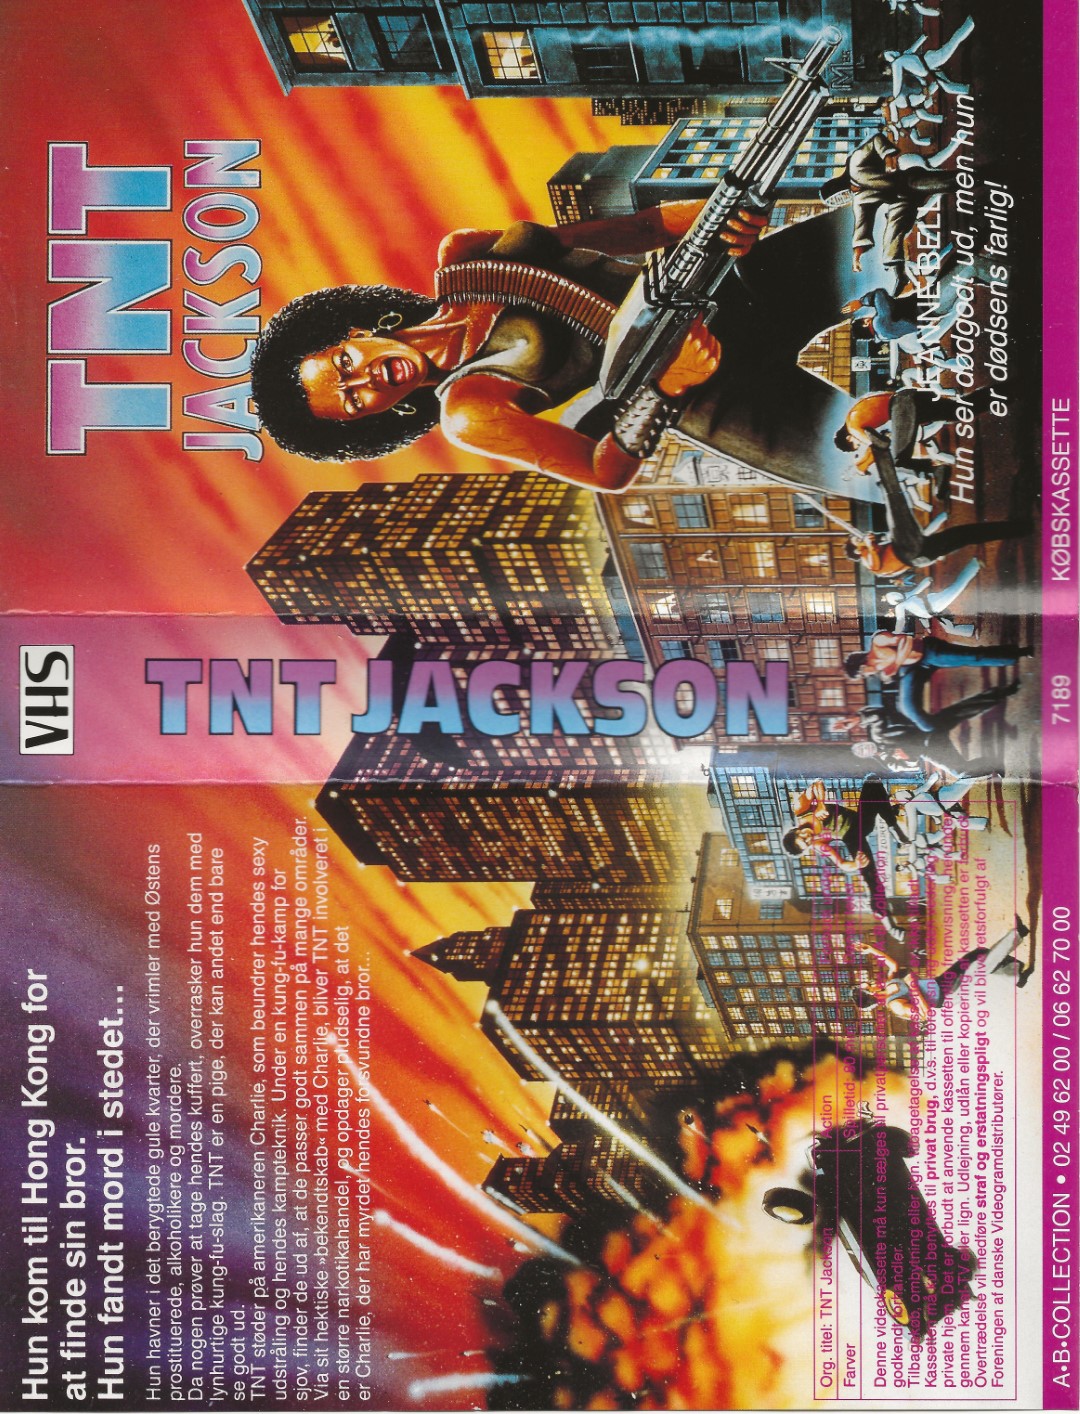 TNT Jackson  VHS A-B-Collection 1974